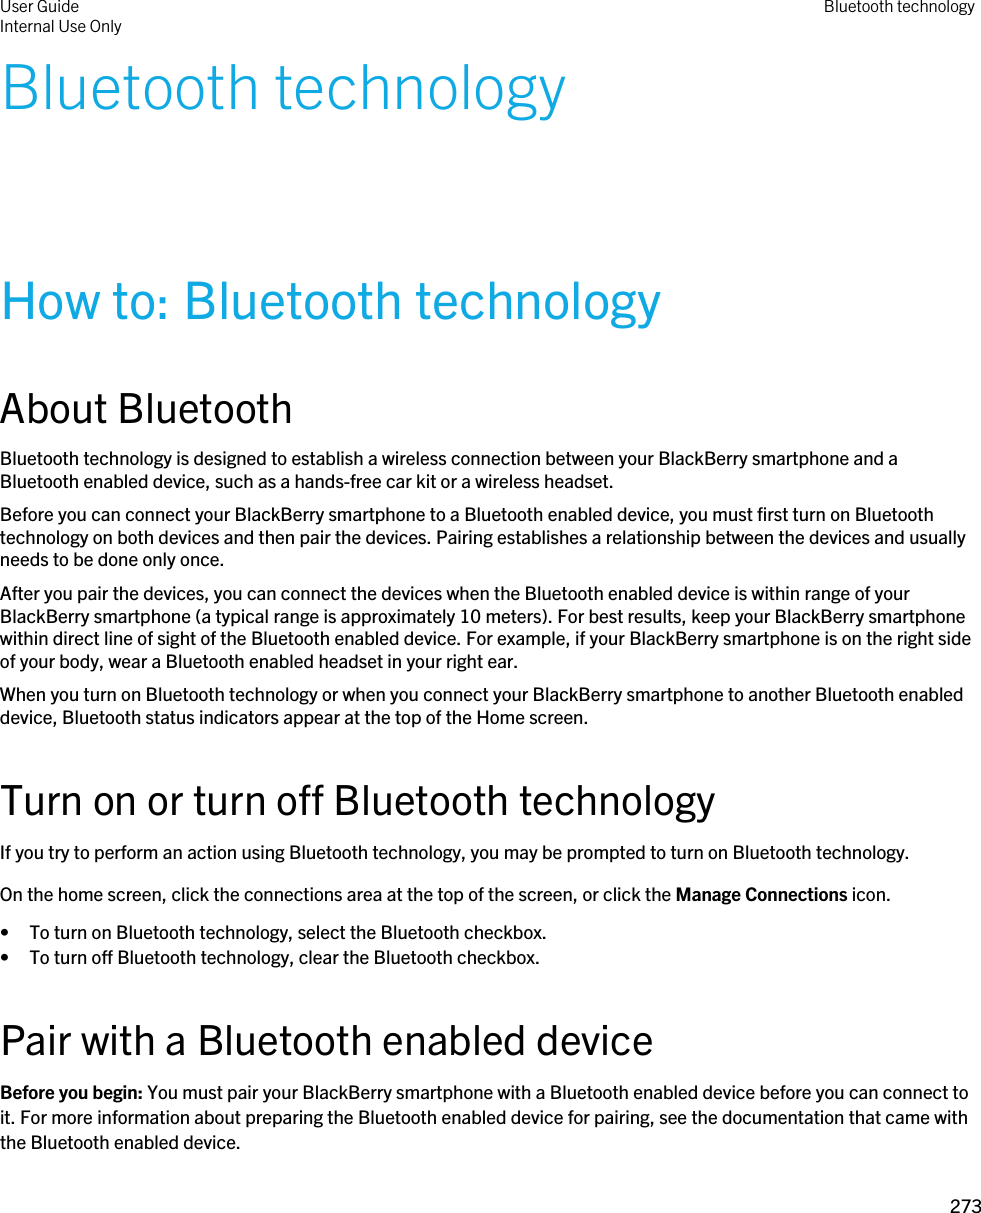 Bluetooth technologyHow to: Bluetooth technologyAbout BluetoothBluetooth technology is designed to establish a wireless connection between your BlackBerry smartphone and a Bluetooth enabled device, such as a hands-free car kit or a wireless headset.Before you can connect your BlackBerry smartphone to a Bluetooth enabled device, you must first turn on Bluetooth technology on both devices and then pair the devices. Pairing establishes a relationship between the devices and usually needs to be done only once.After you pair the devices, you can connect the devices when the Bluetooth enabled device is within range of your BlackBerry smartphone (a typical range is approximately 10 meters). For best results, keep your BlackBerry smartphone within direct line of sight of the Bluetooth enabled device. For example, if your BlackBerry smartphone is on the right side of your body, wear a Bluetooth enabled headset in your right ear.When you turn on Bluetooth technology or when you connect your BlackBerry smartphone to another Bluetooth enabled device, Bluetooth status indicators appear at the top of the Home screen.Turn on or turn off Bluetooth technologyIf you try to perform an action using Bluetooth technology, you may be prompted to turn on Bluetooth technology.On the home screen, click the connections area at the top of the screen, or click the Manage Connections icon.• To turn on Bluetooth technology, select the Bluetooth checkbox.• To turn off Bluetooth technology, clear the Bluetooth checkbox.Pair with a Bluetooth enabled deviceBefore you begin: You must pair your BlackBerry smartphone with a Bluetooth enabled device before you can connect to it. For more information about preparing the Bluetooth enabled device for pairing, see the documentation that came with the Bluetooth enabled device.User GuideInternal Use Only Bluetooth technology273 